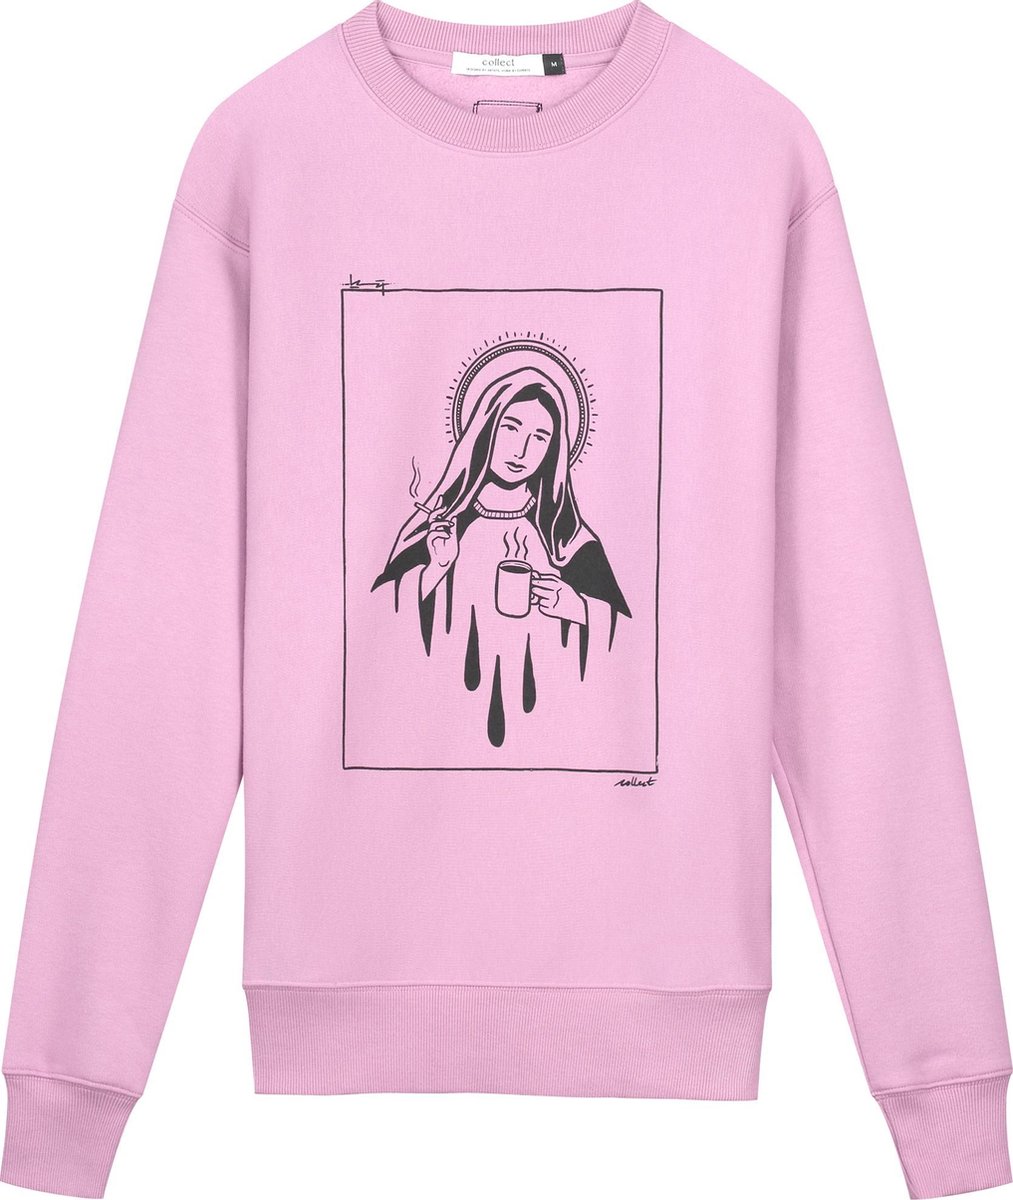 Collect The Label - Hippe Trui - Maria Sweater - Paars - Unisex - S